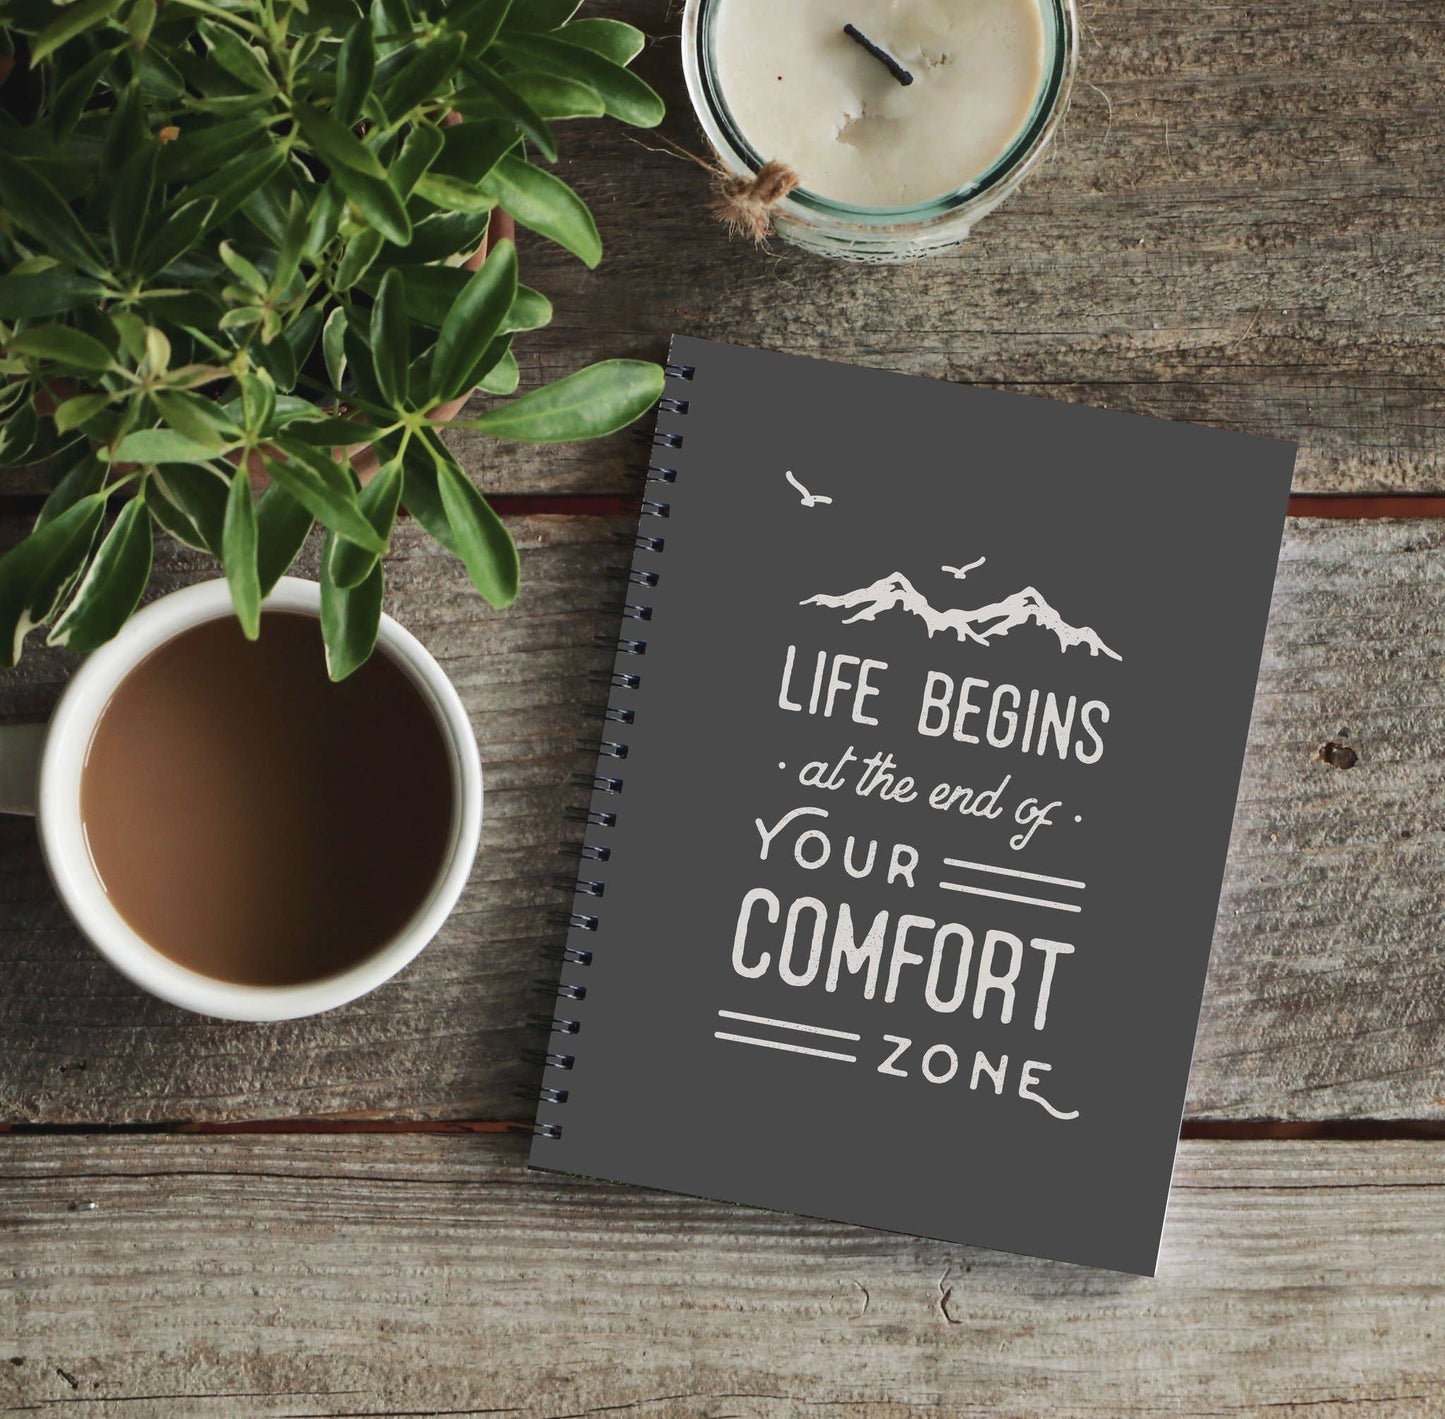 Life Begins At The End Of Your Comfort Zone Journal